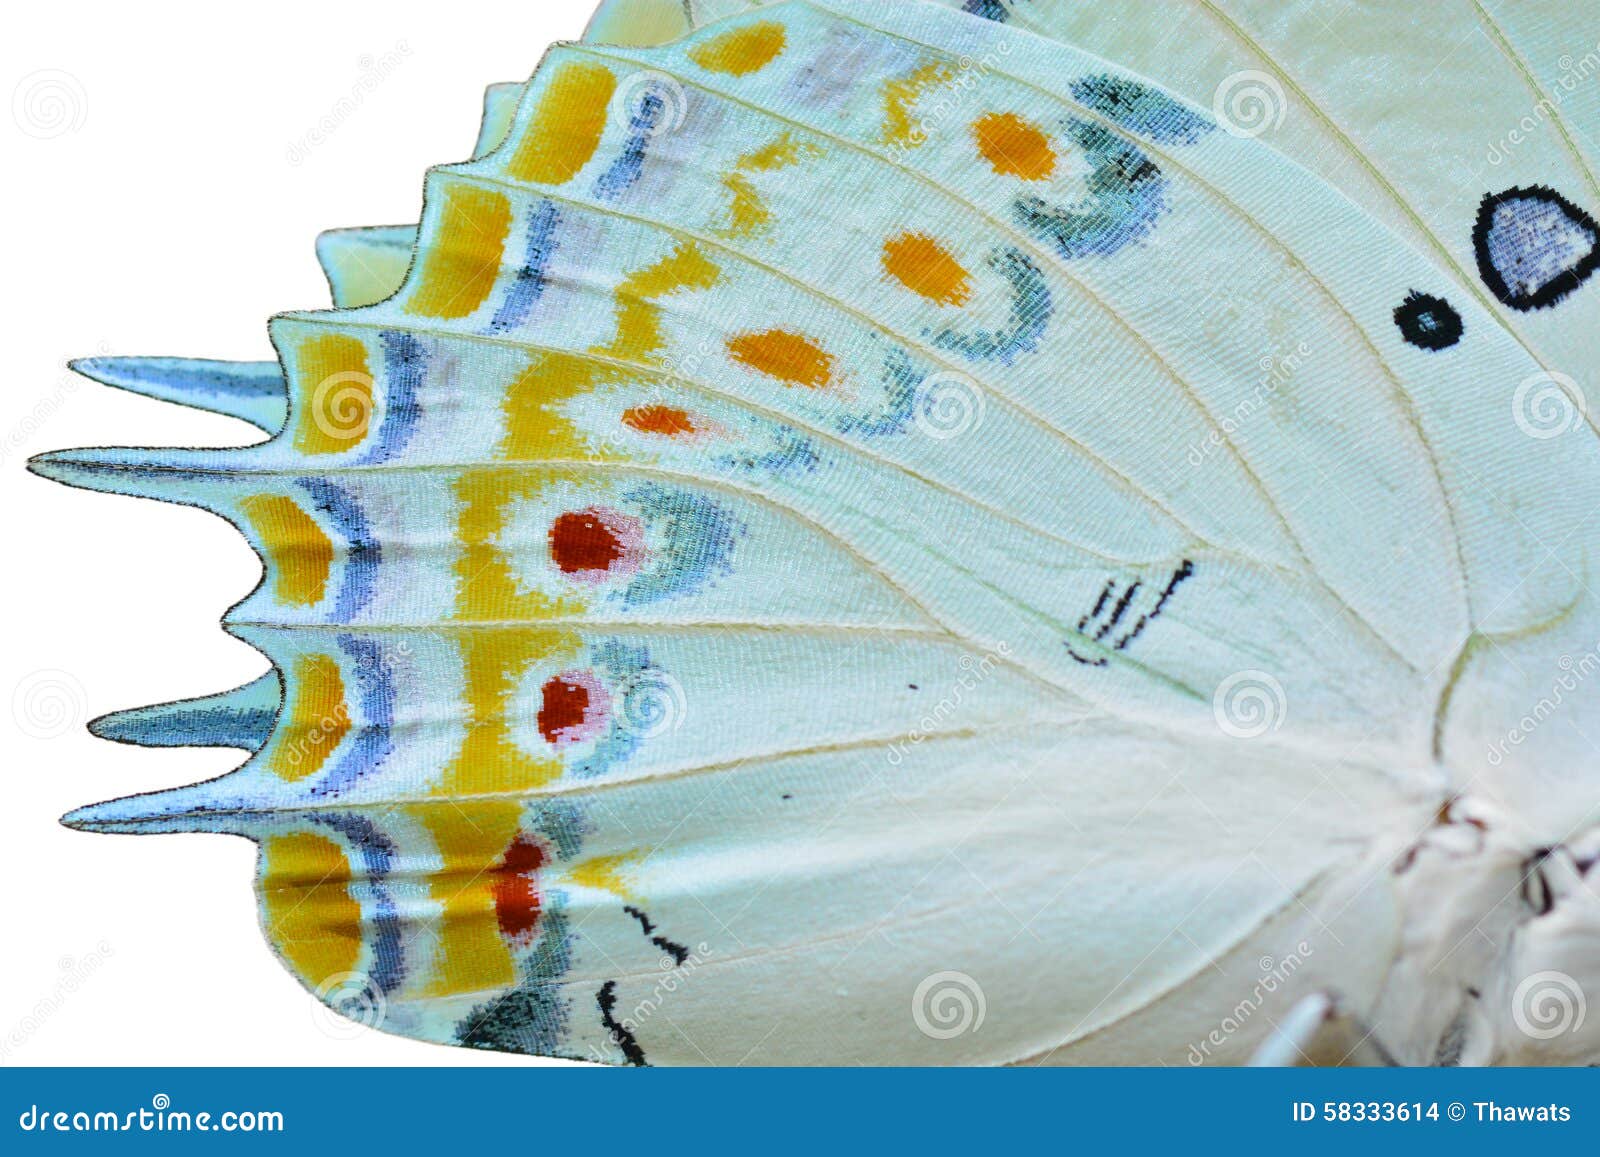 20 Rainbow Butterfly Wing Photos   Free & Royalty Free Stock ...